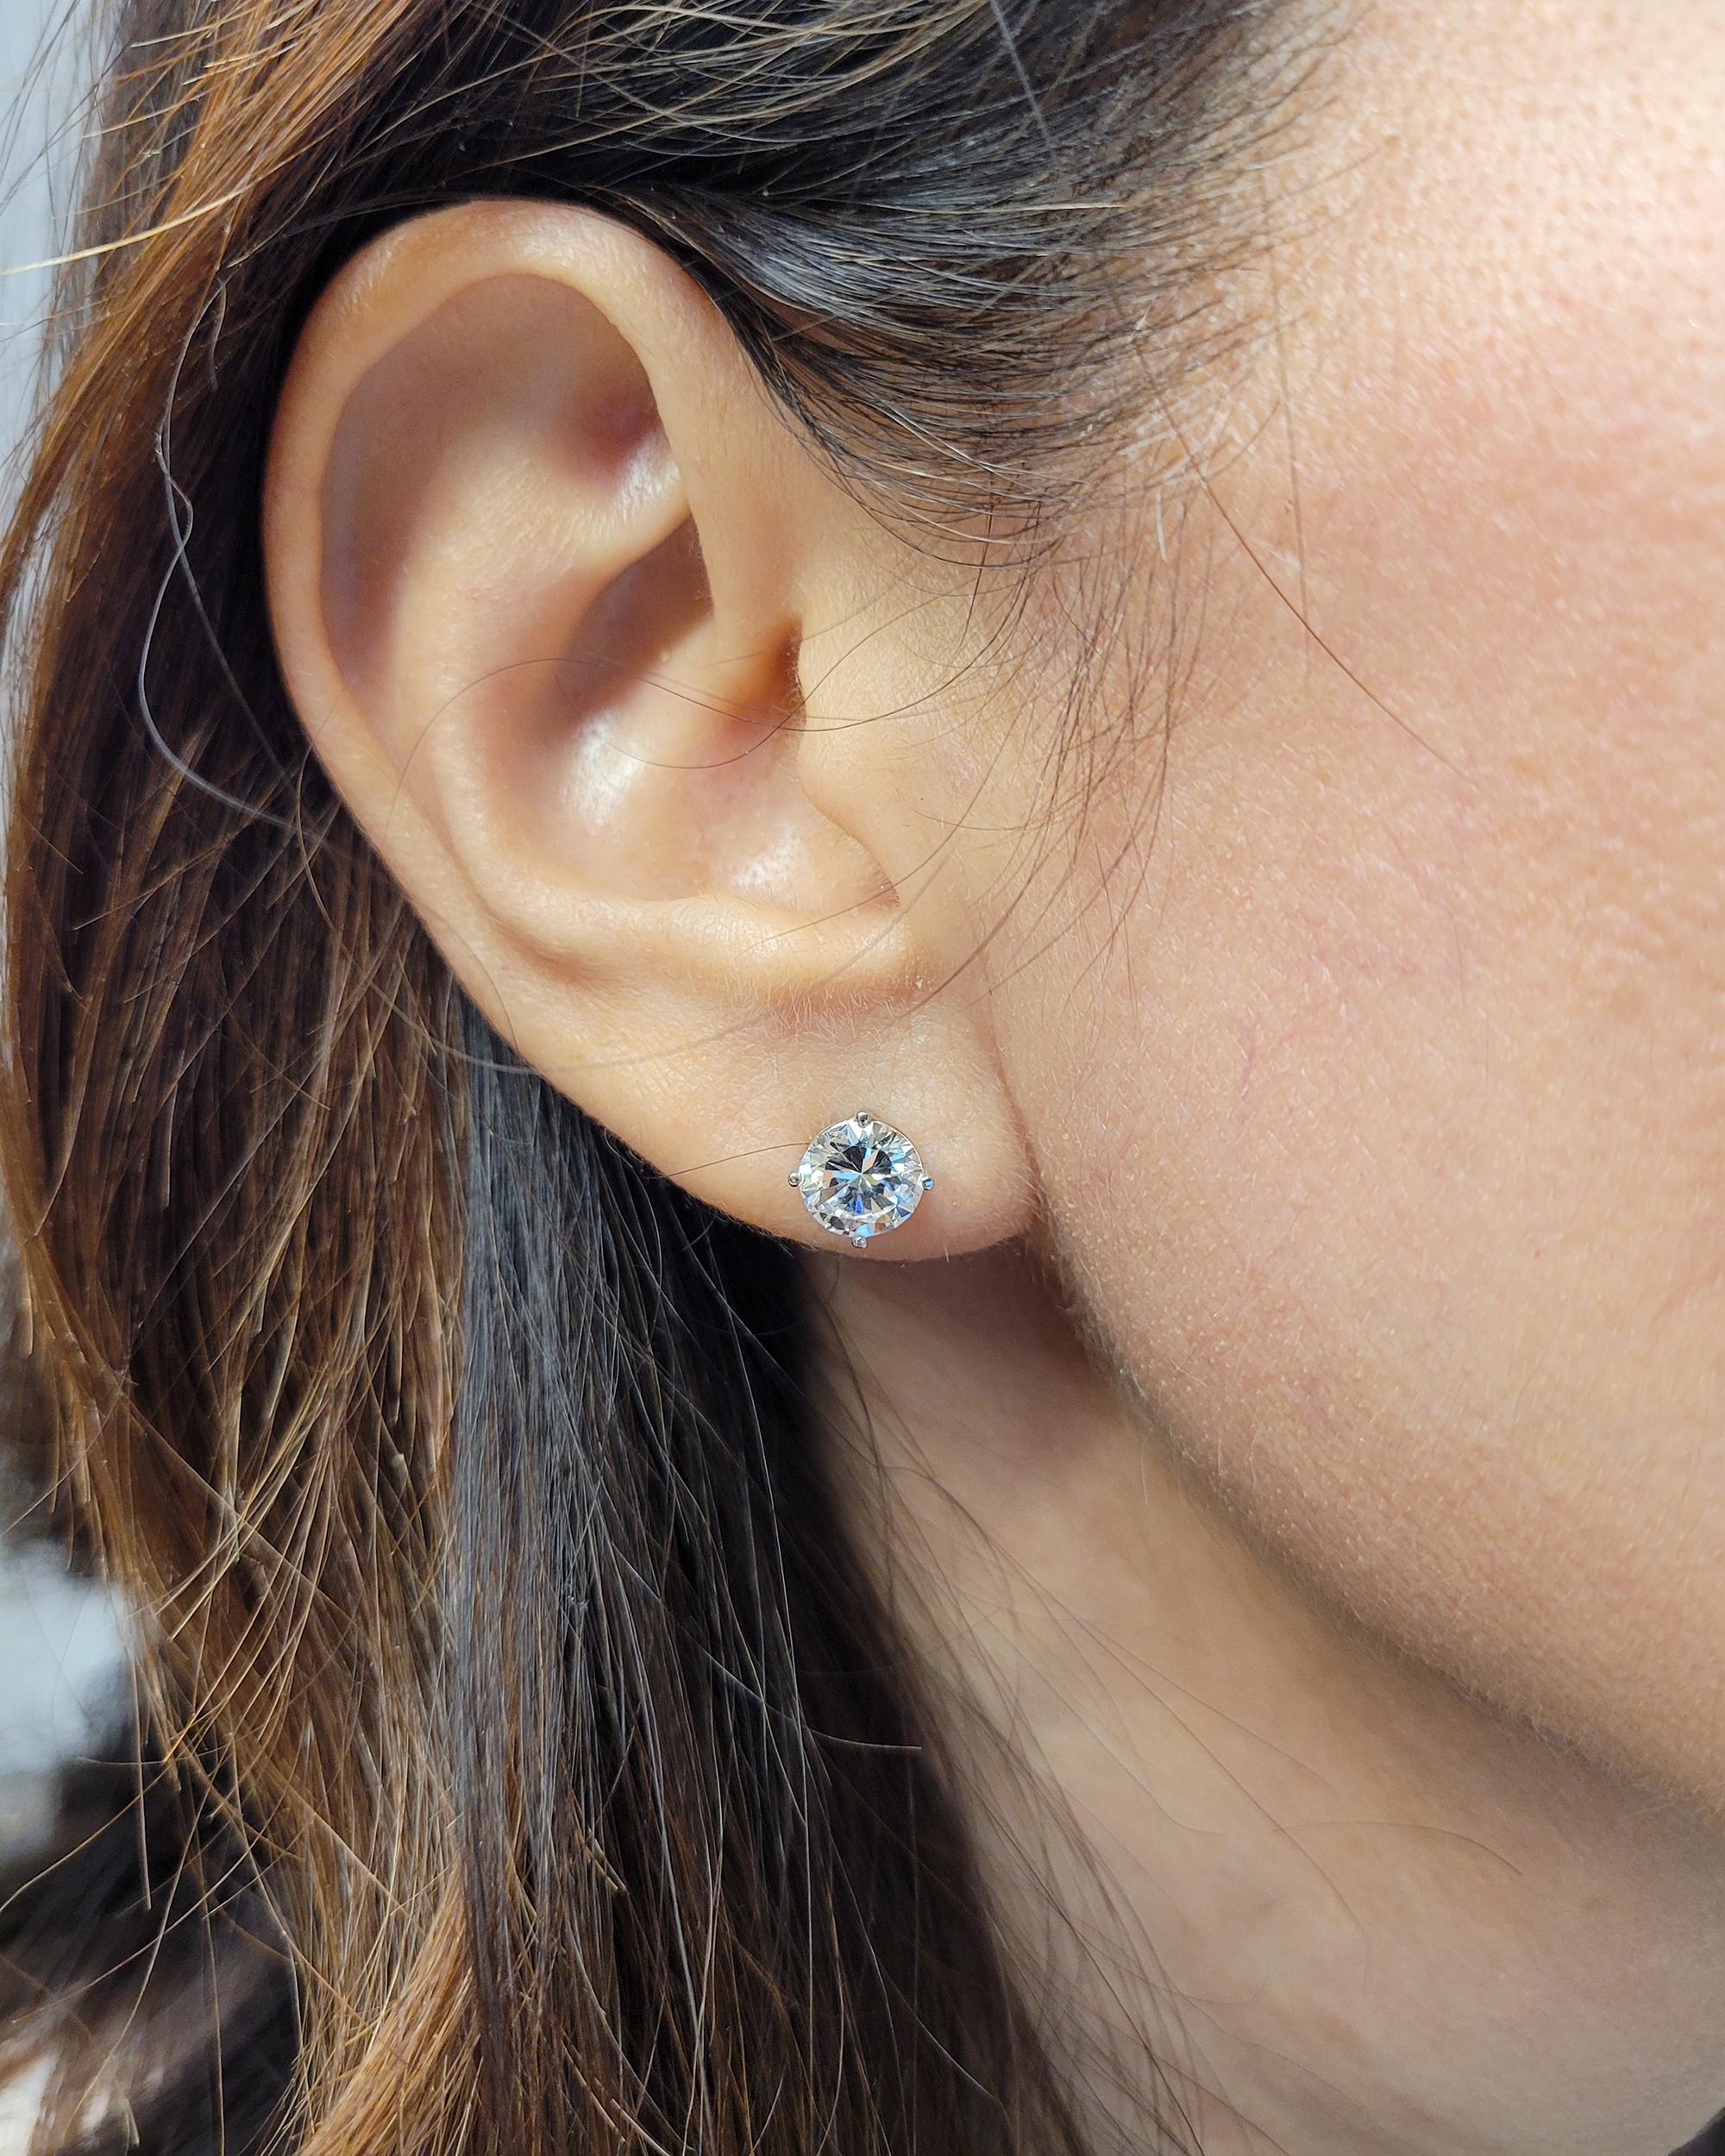 Introducing these stunning diamond stud earrings, featuring round brilliant-cut diamonds of exceptional quality and brilliance. With a combined weight of 2.59 carats, these diamonds have been certified by the prestigious Gemological Institute of